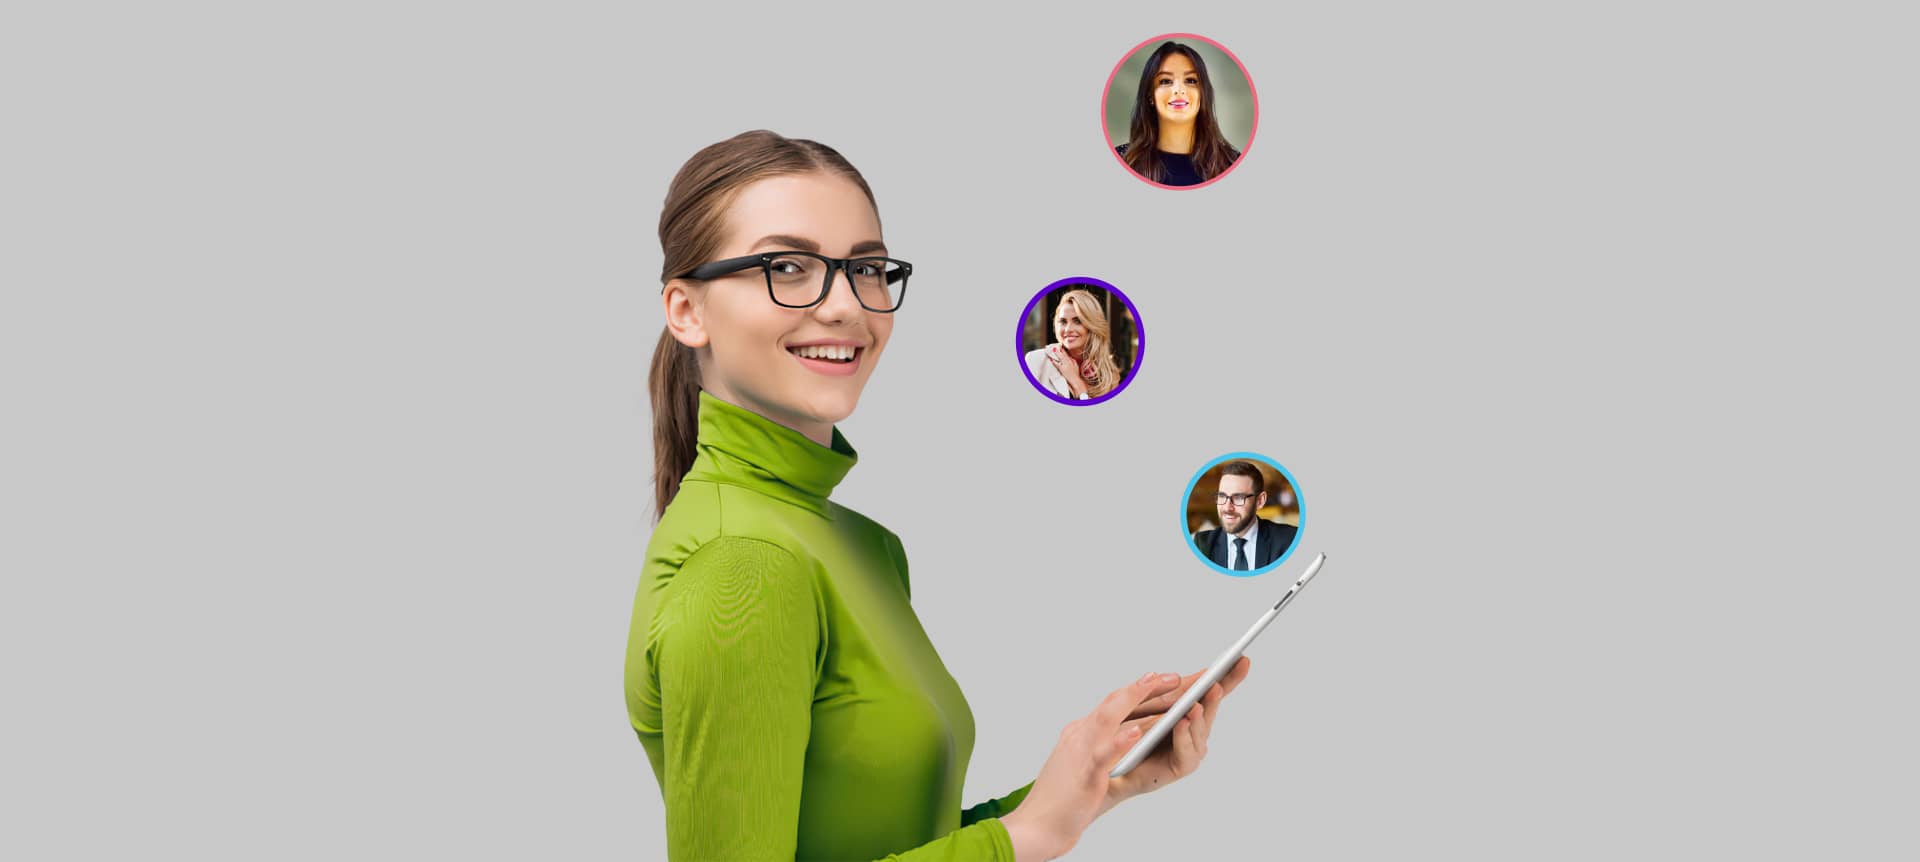 Recruit video interviewing candidates through top video interview software